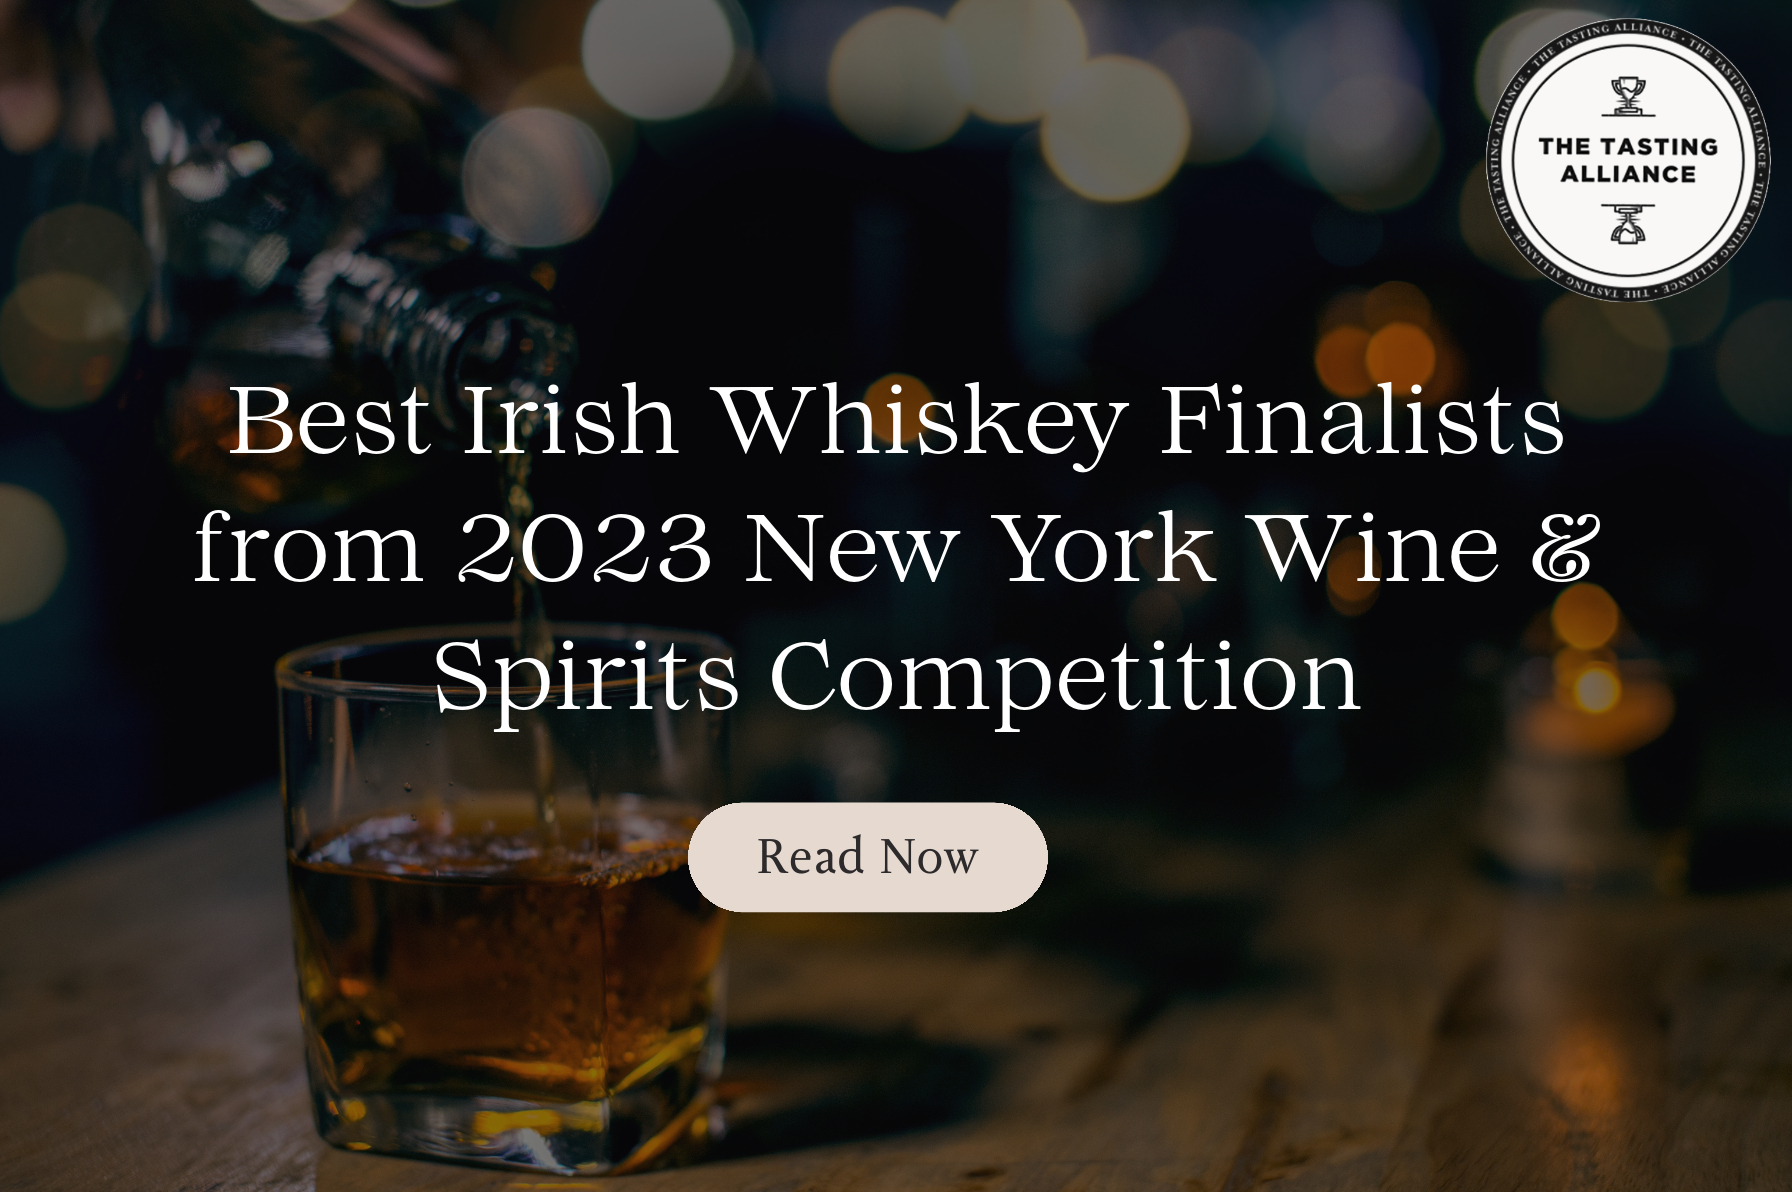 The Tasting Alliance's Best Irish Whiskey Finalists from 2023 New York Wine & Spirits Competition